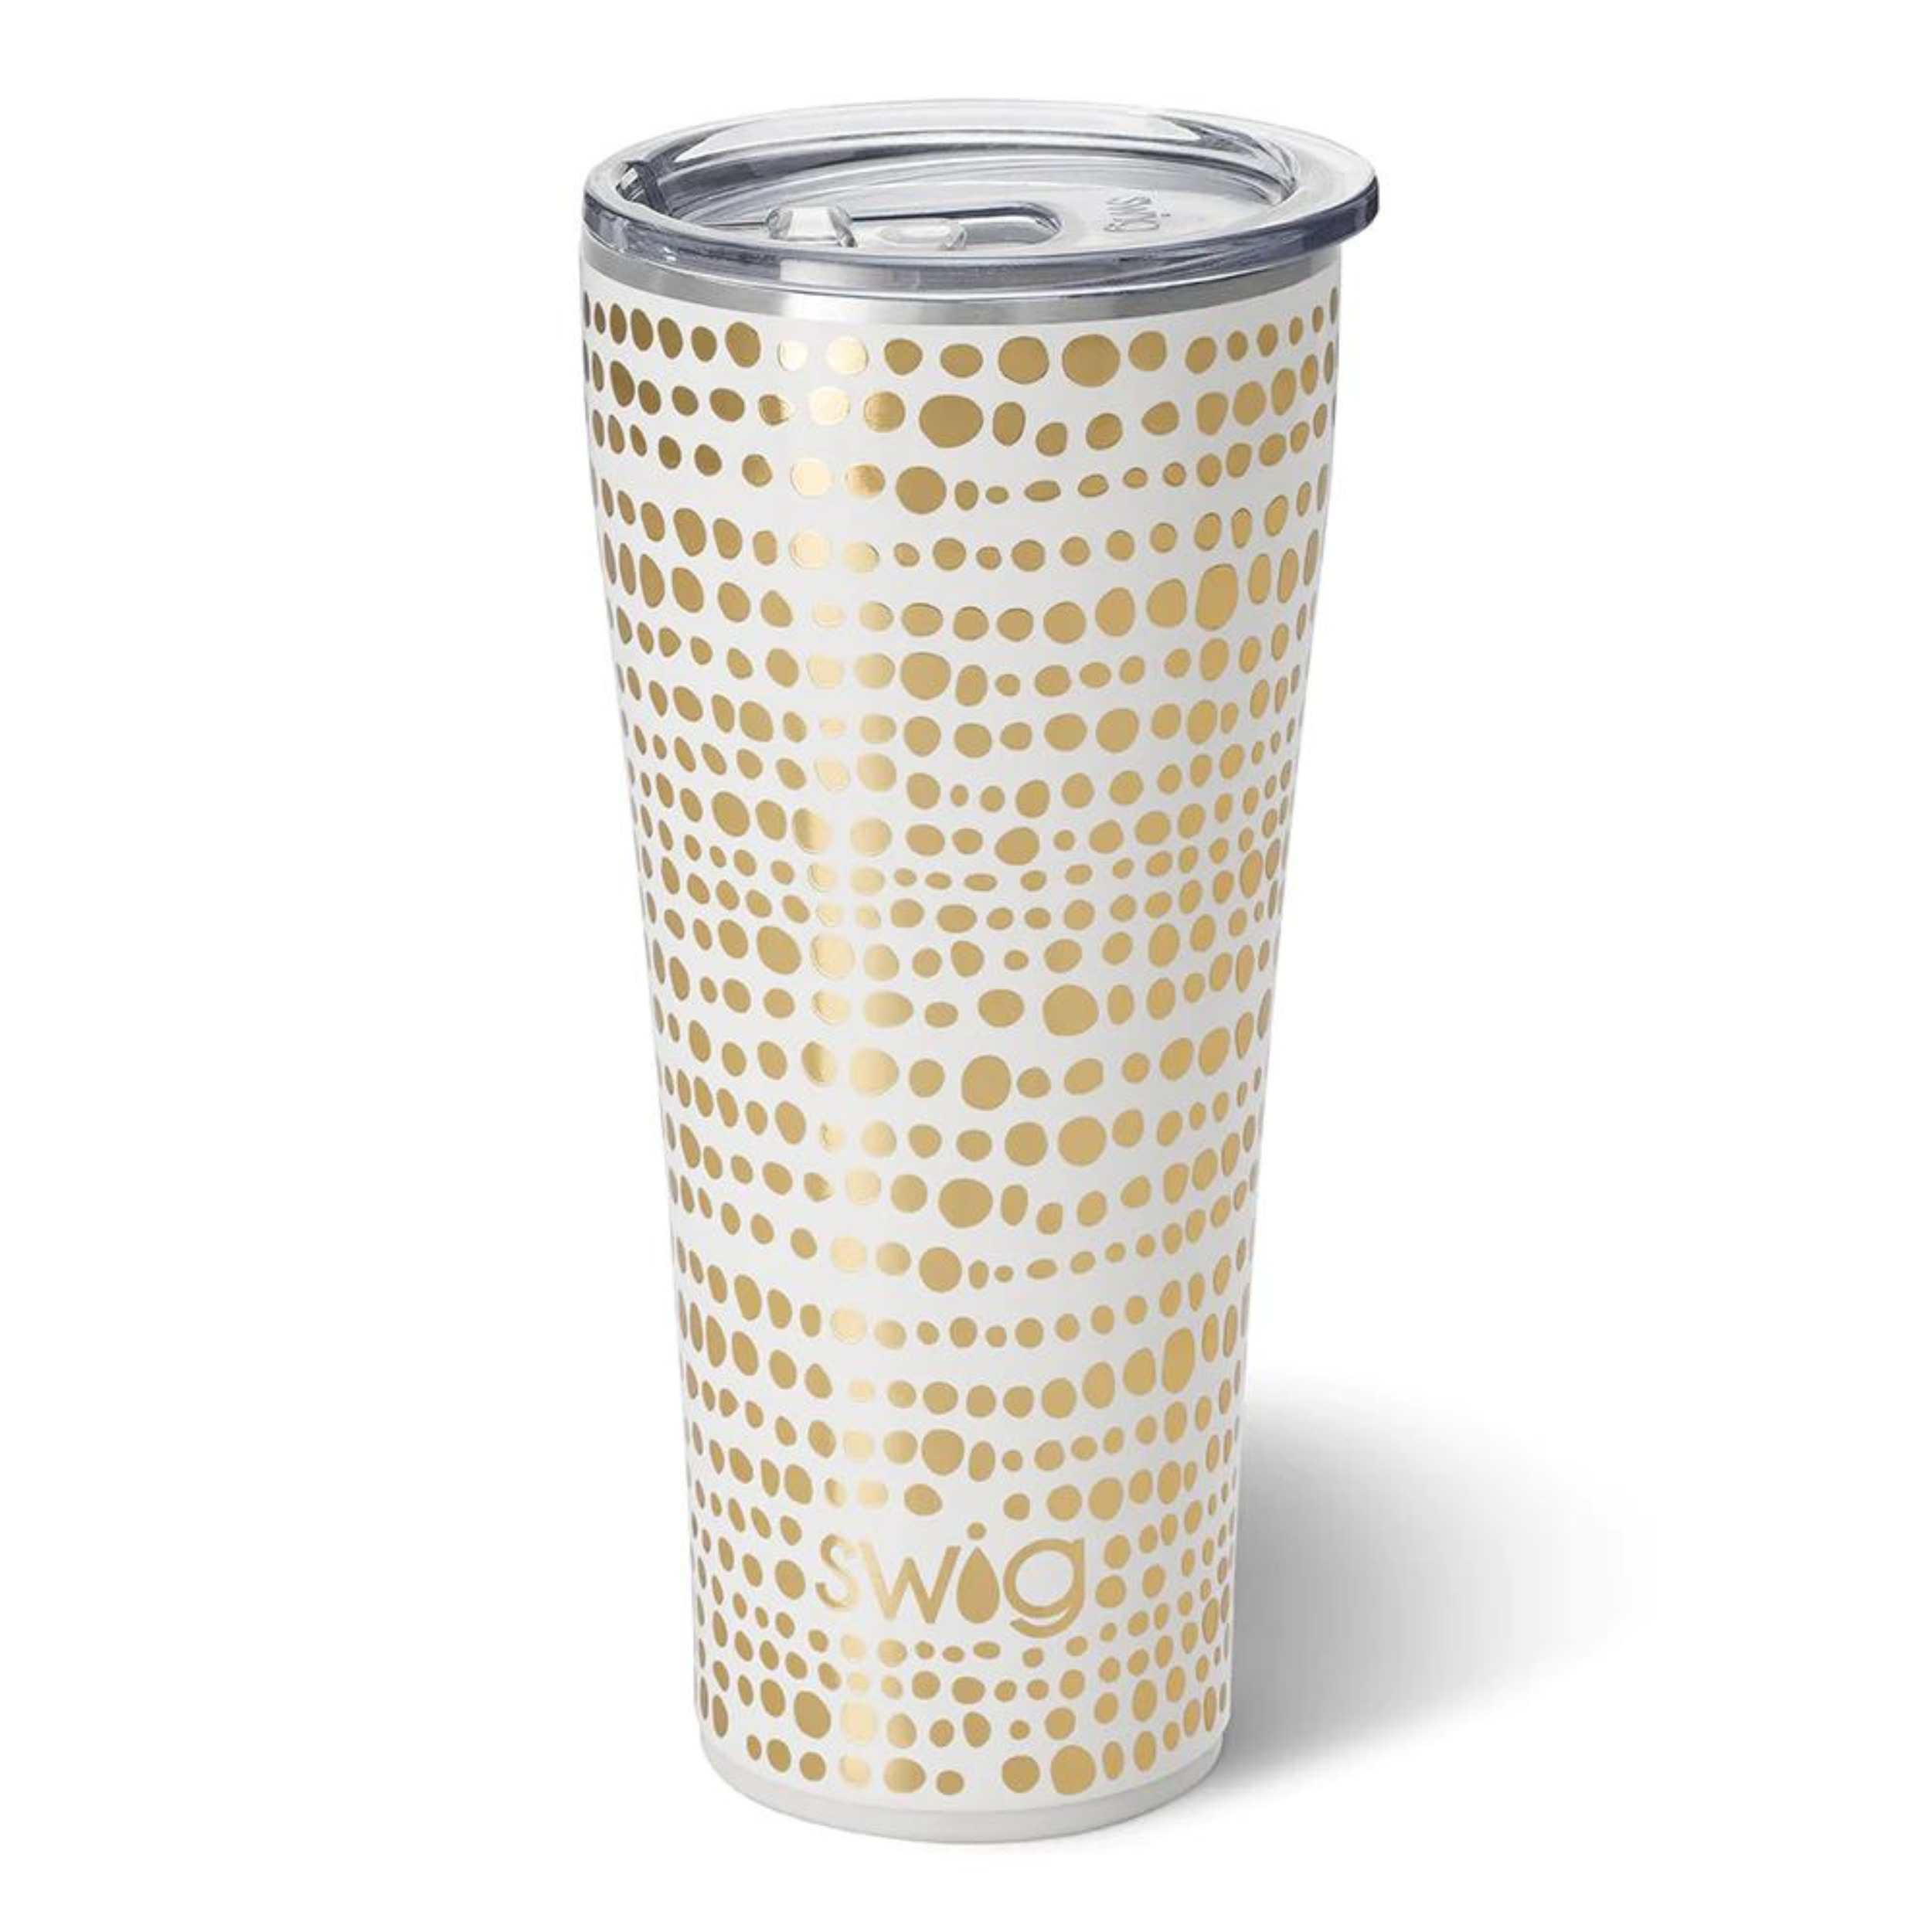 Swig | Glamazon Gold 32 oz Tumbler. This tumble is pictured on a white background.